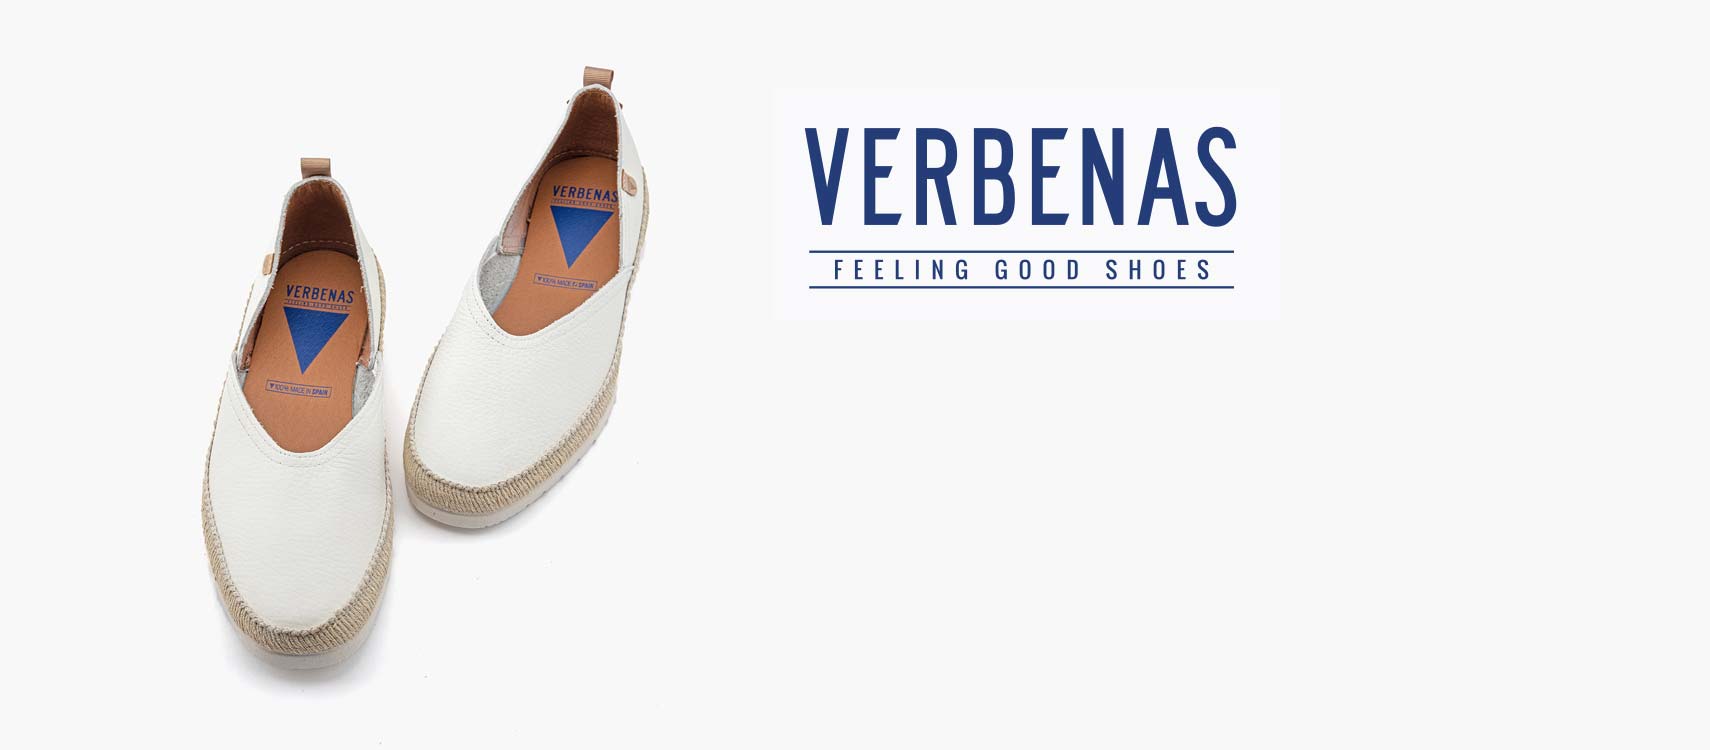 Verbenas Shoes - Casual Ladies Wear for the Urban Lifestyle